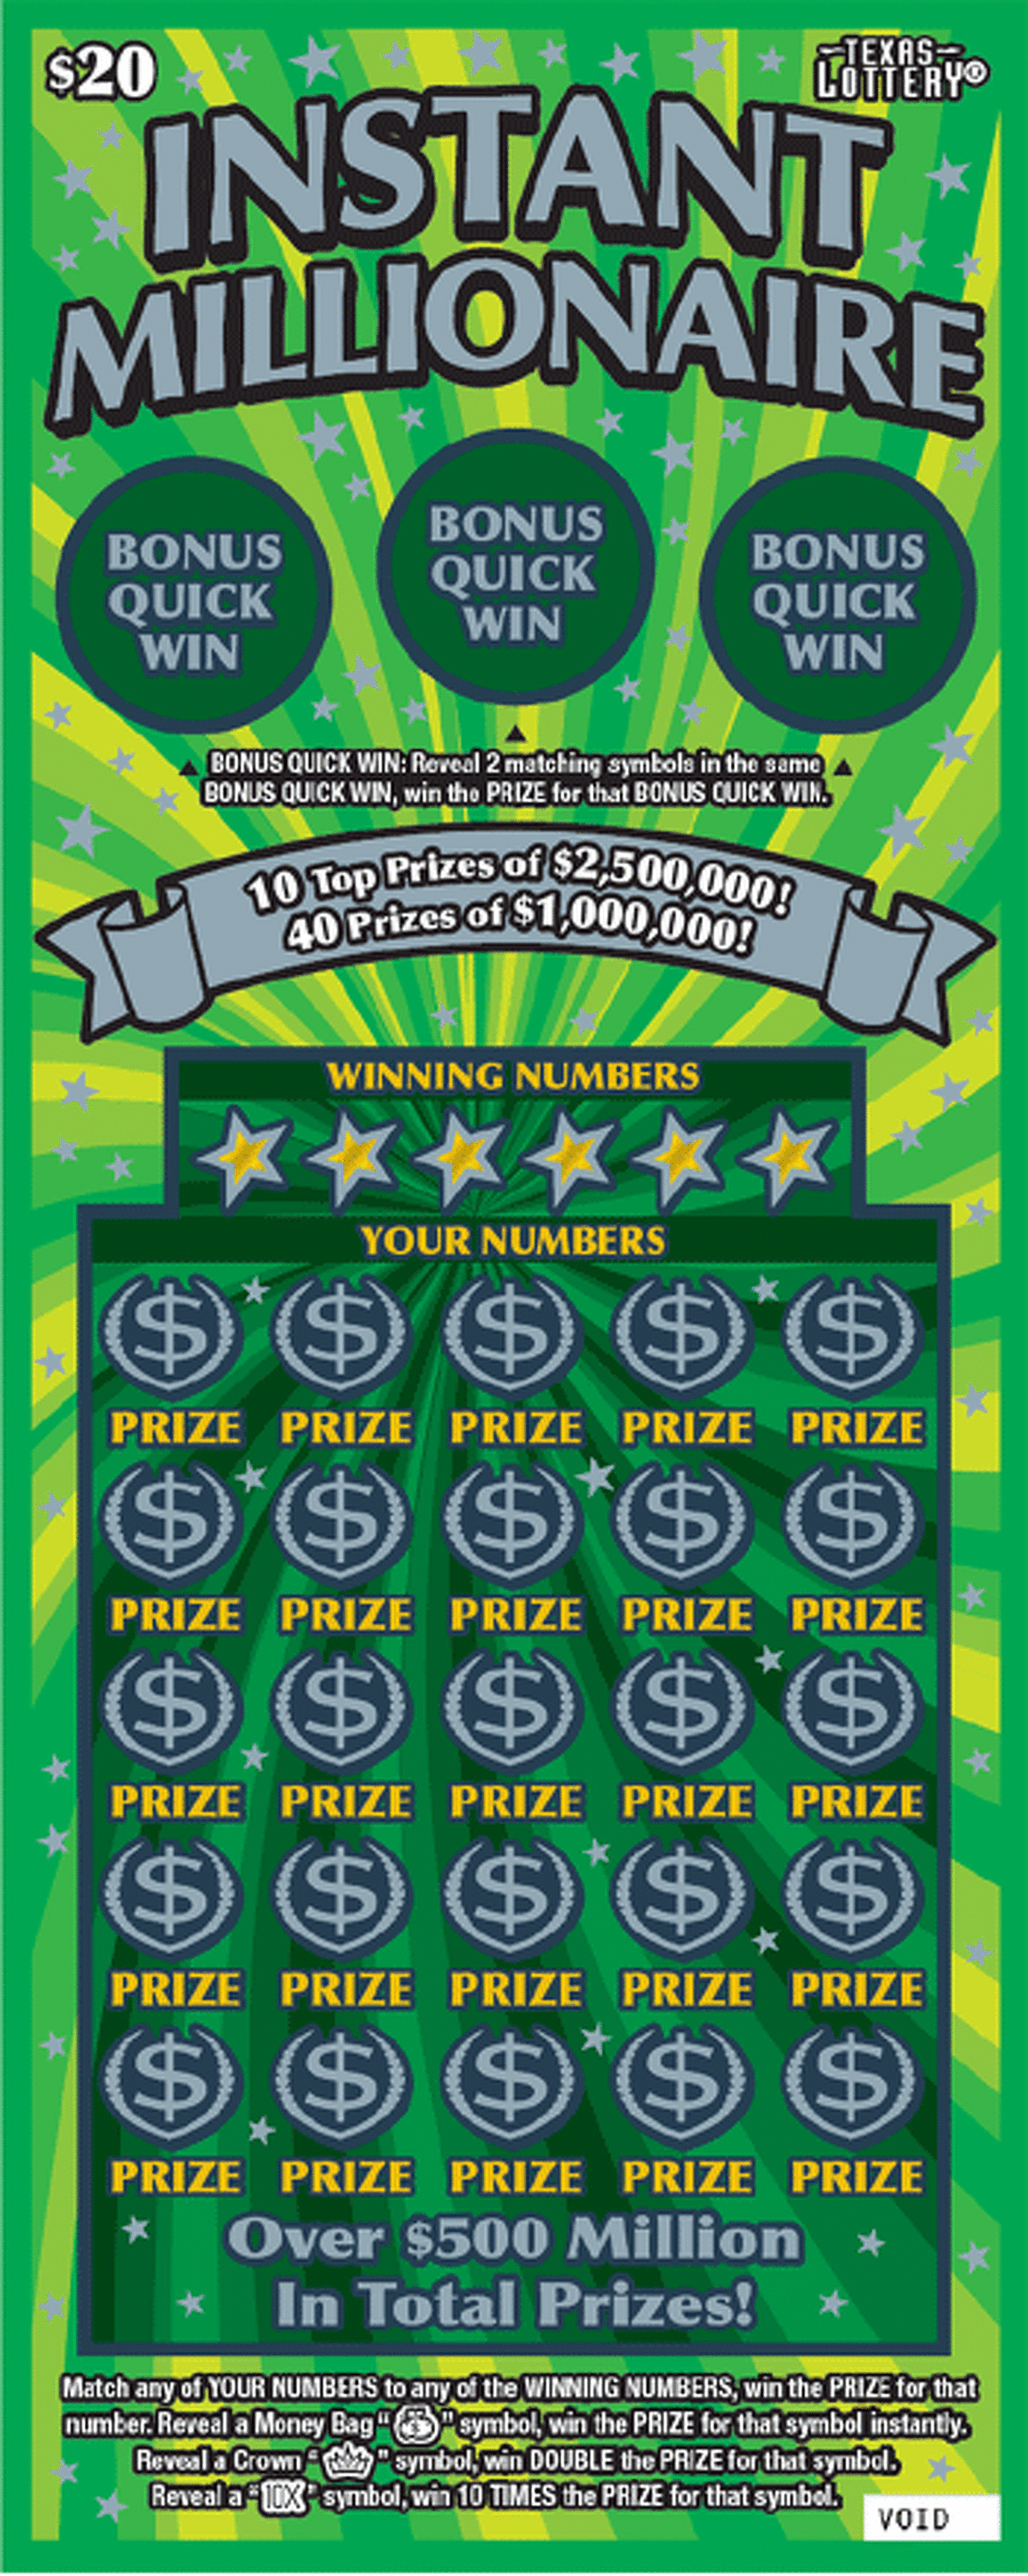 A San Antonio man claimed a $1 million prize in the scratch-off ticket game Instant Millionaire, the Texas Lottery Commission announced Thursday.